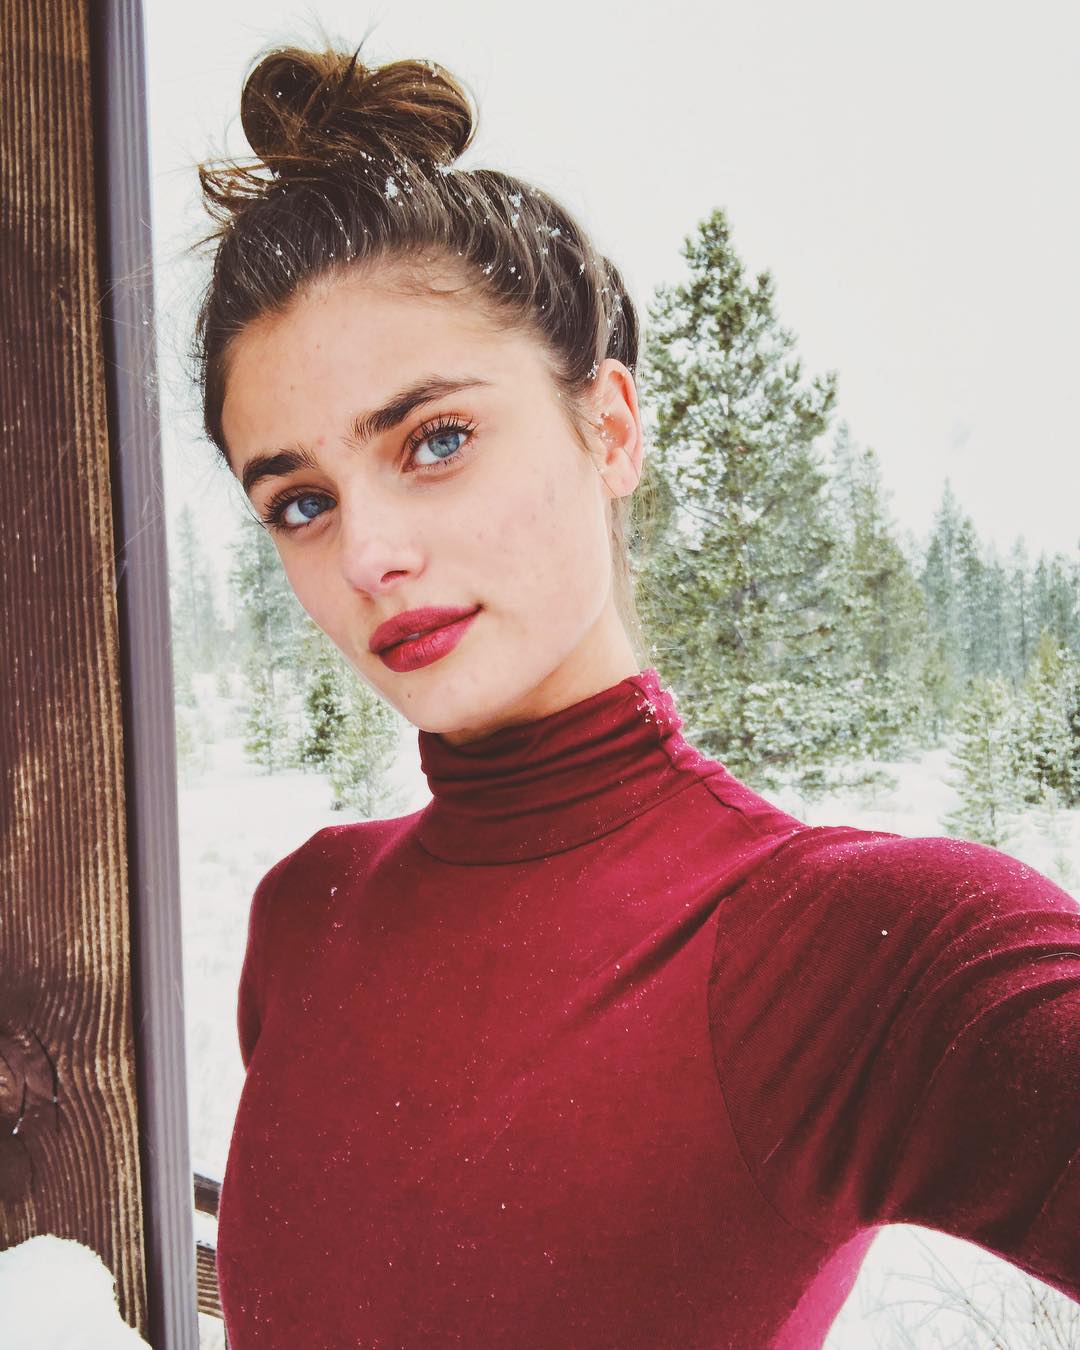 Taylor hill 8 hottest pics, taylor hill 8 instagram